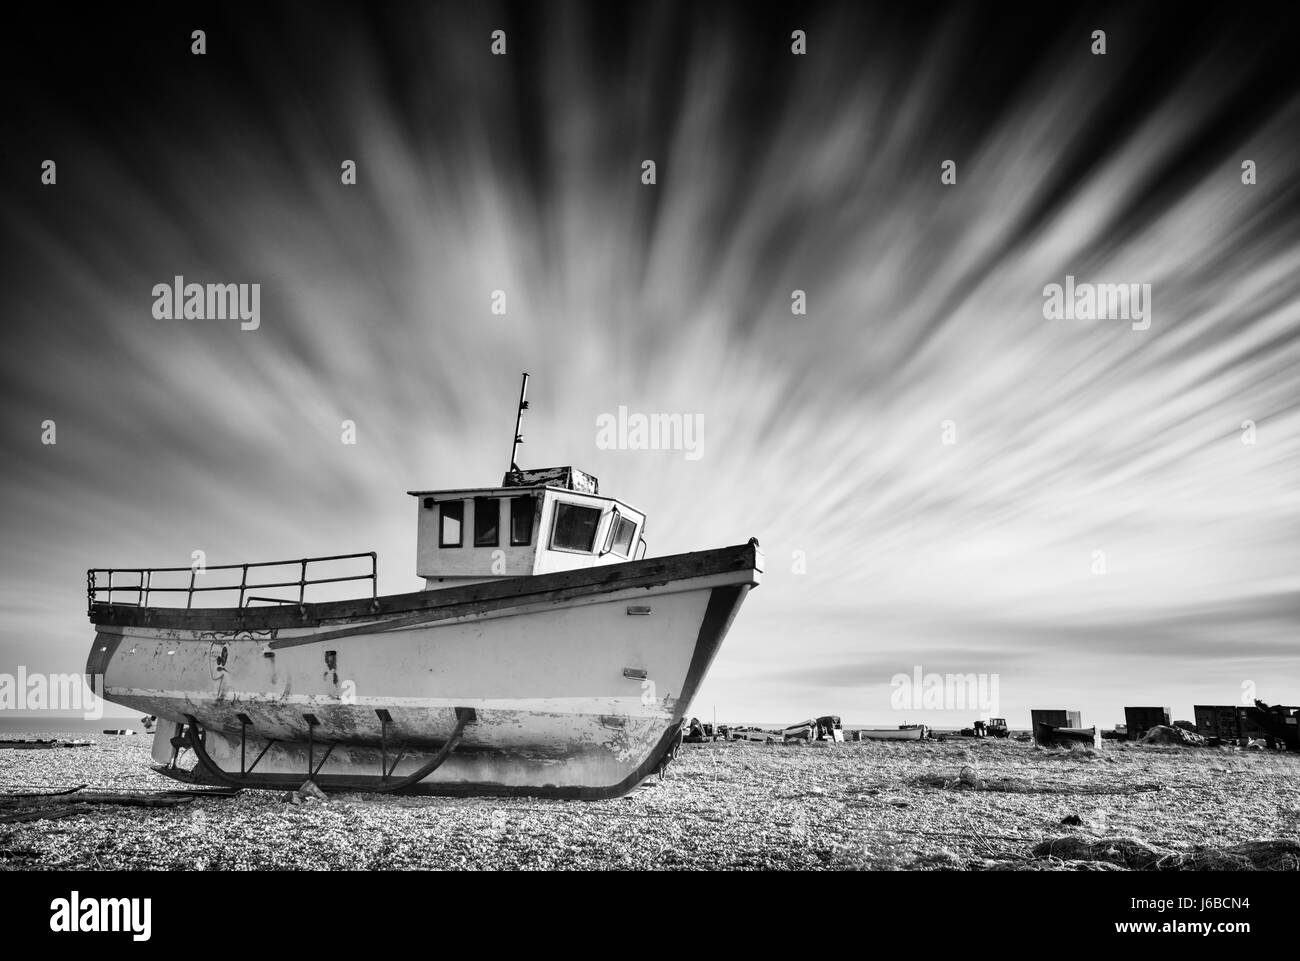 Abandoned old fishing boat on a pebble beach with long exposure clouds in monochrome. Dungeness, England Stock Photo